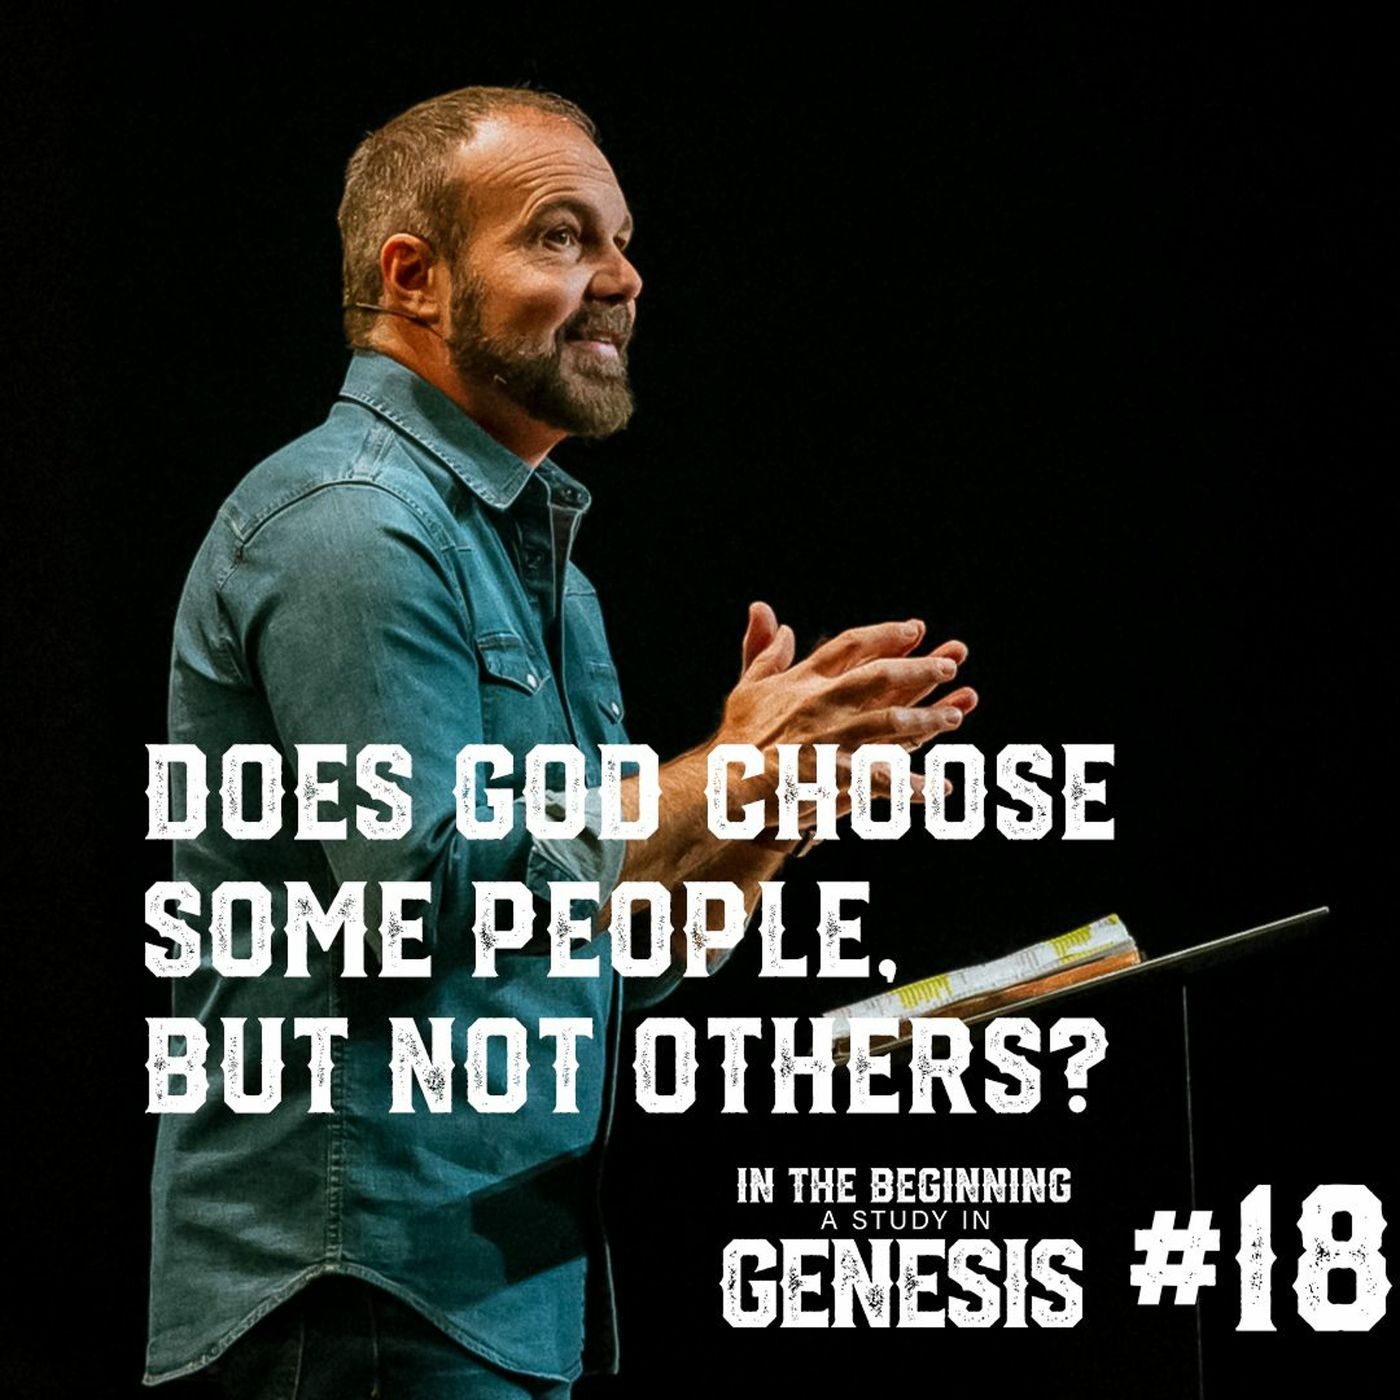 Genesis #18 - Does God Choose Some People, But Not Others?